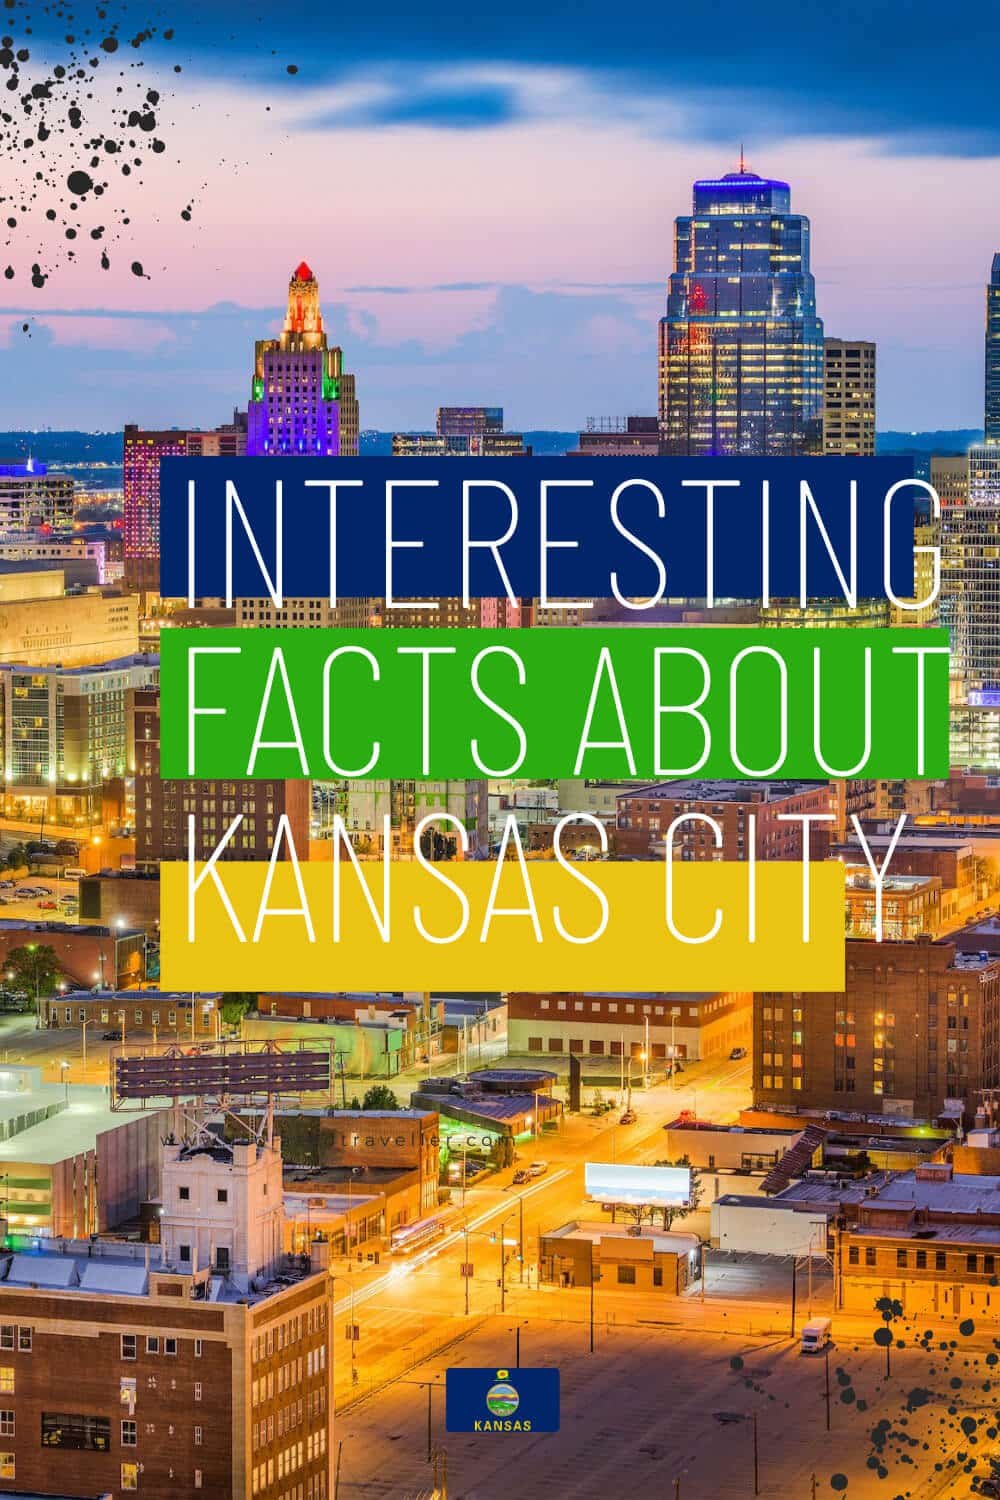 Facts About Kansas City